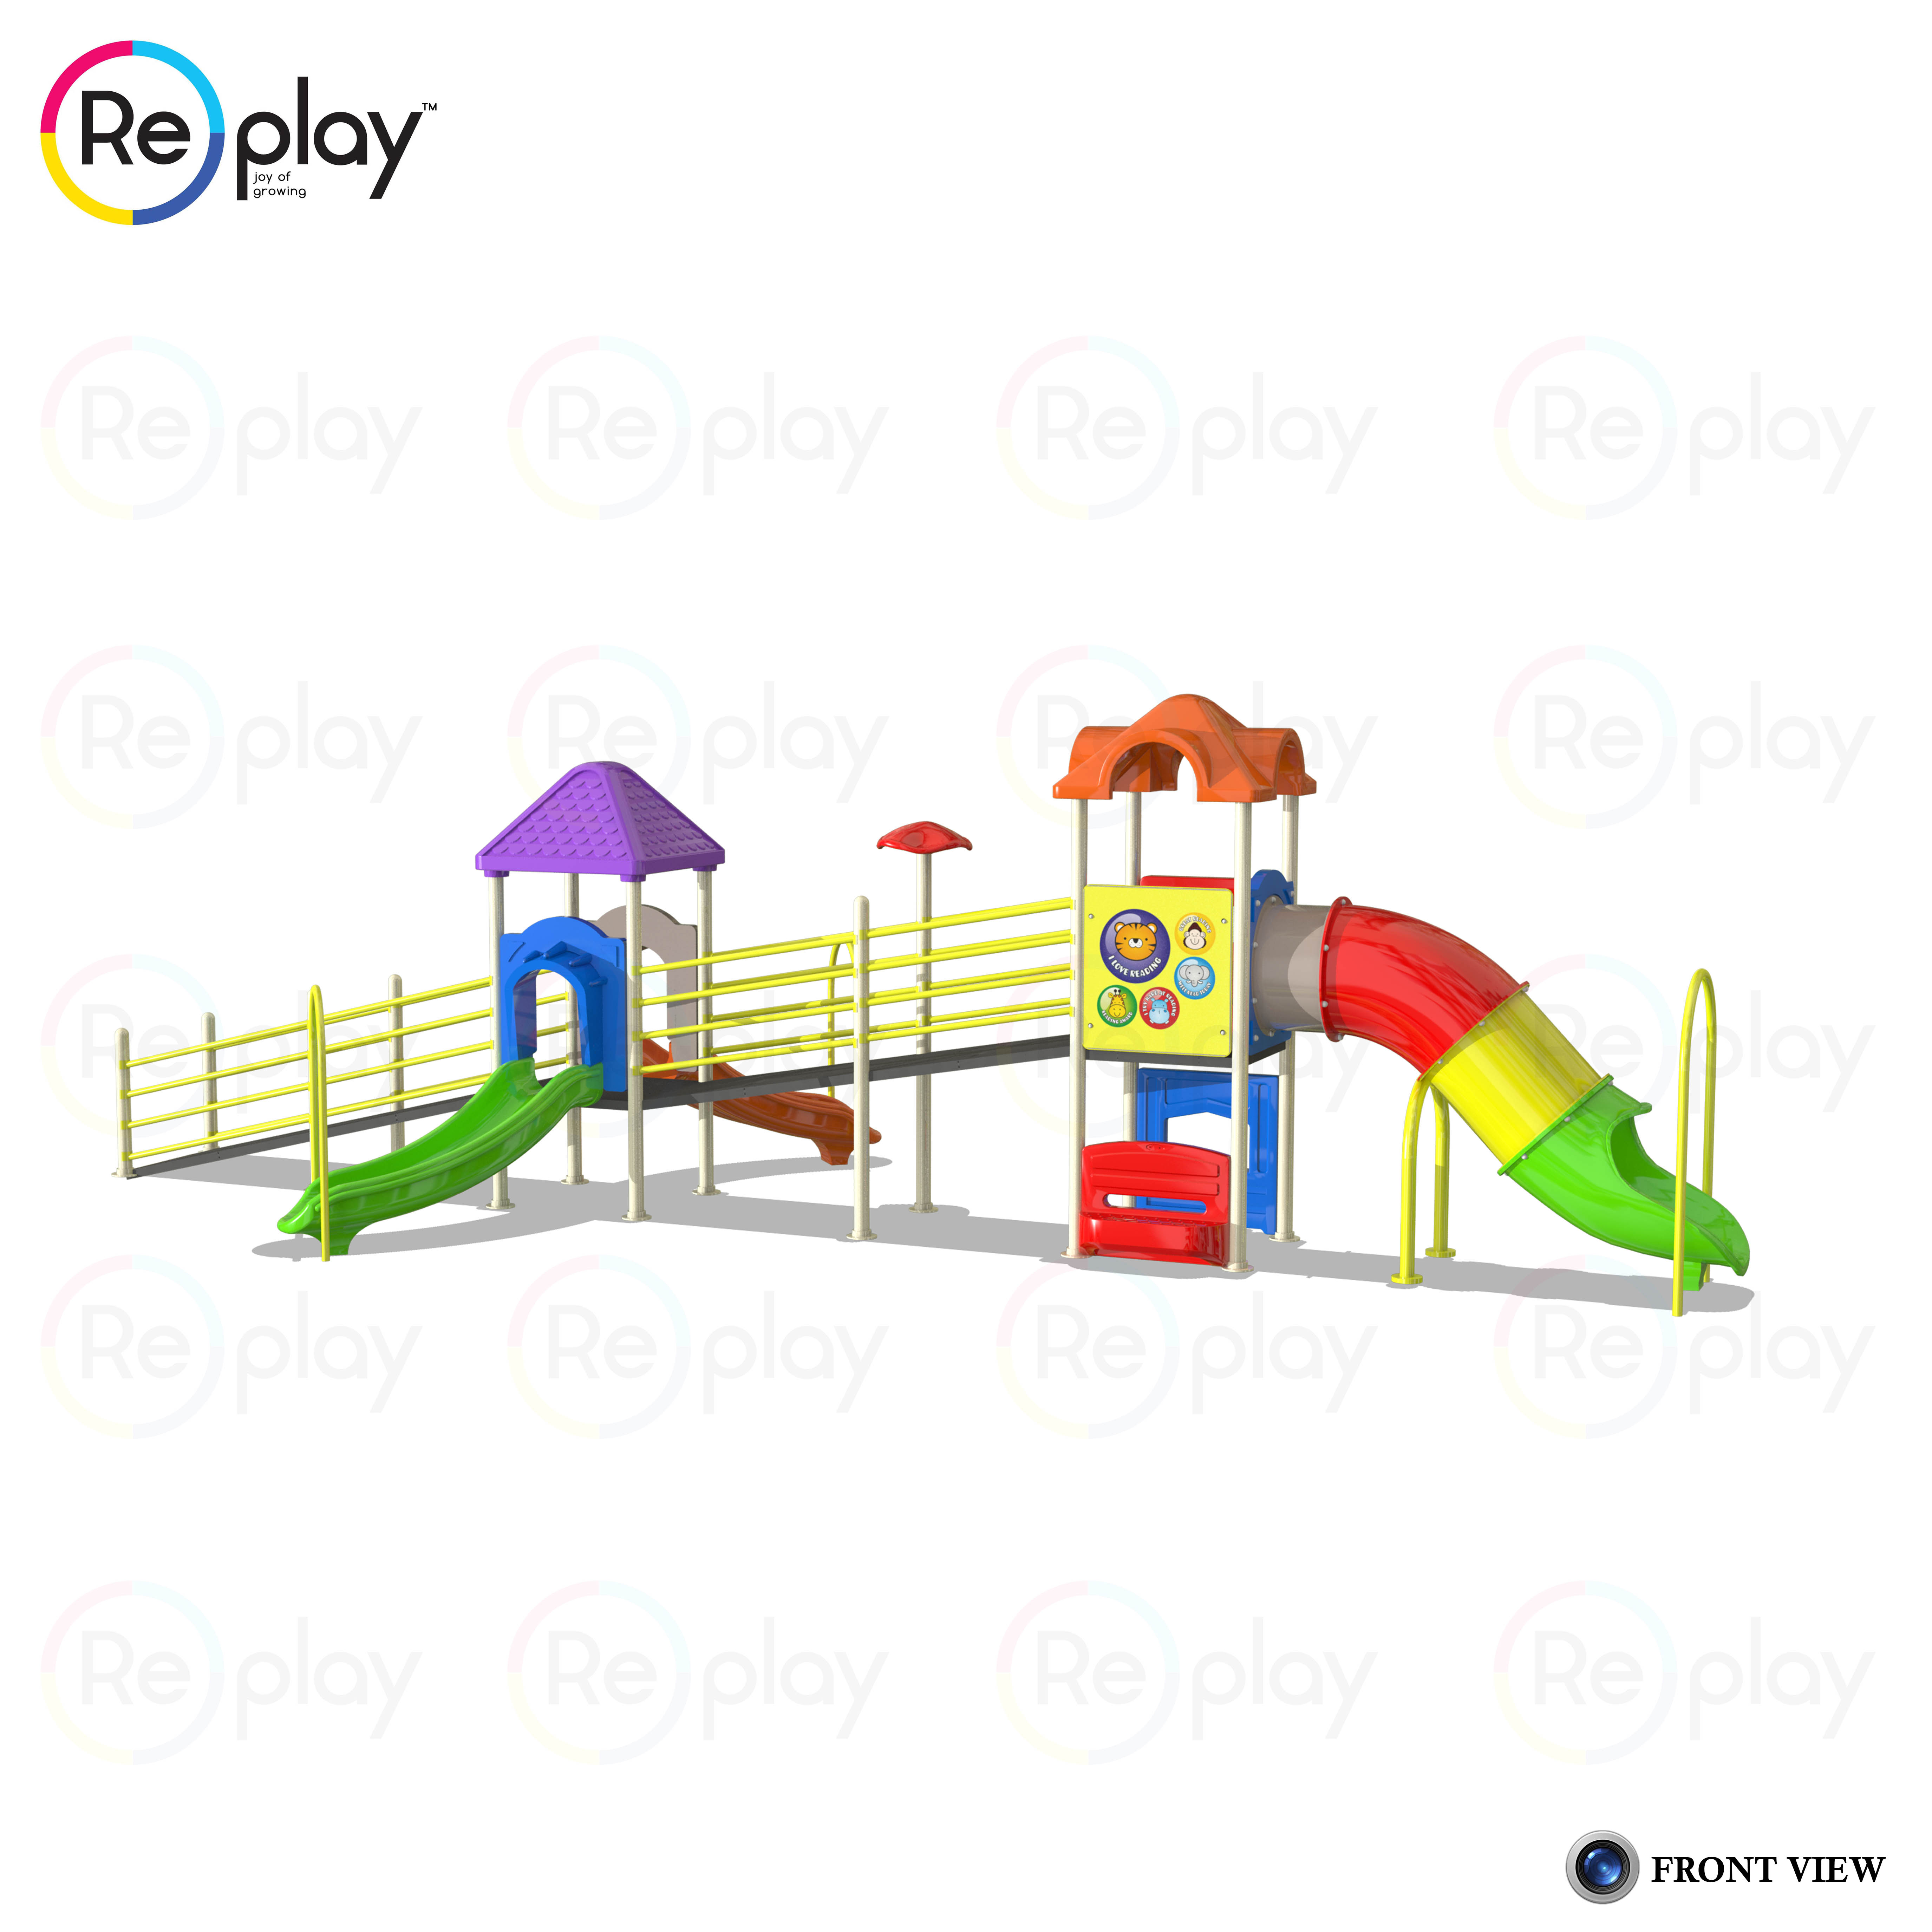 Replay-Specially-abled Playground Equipment